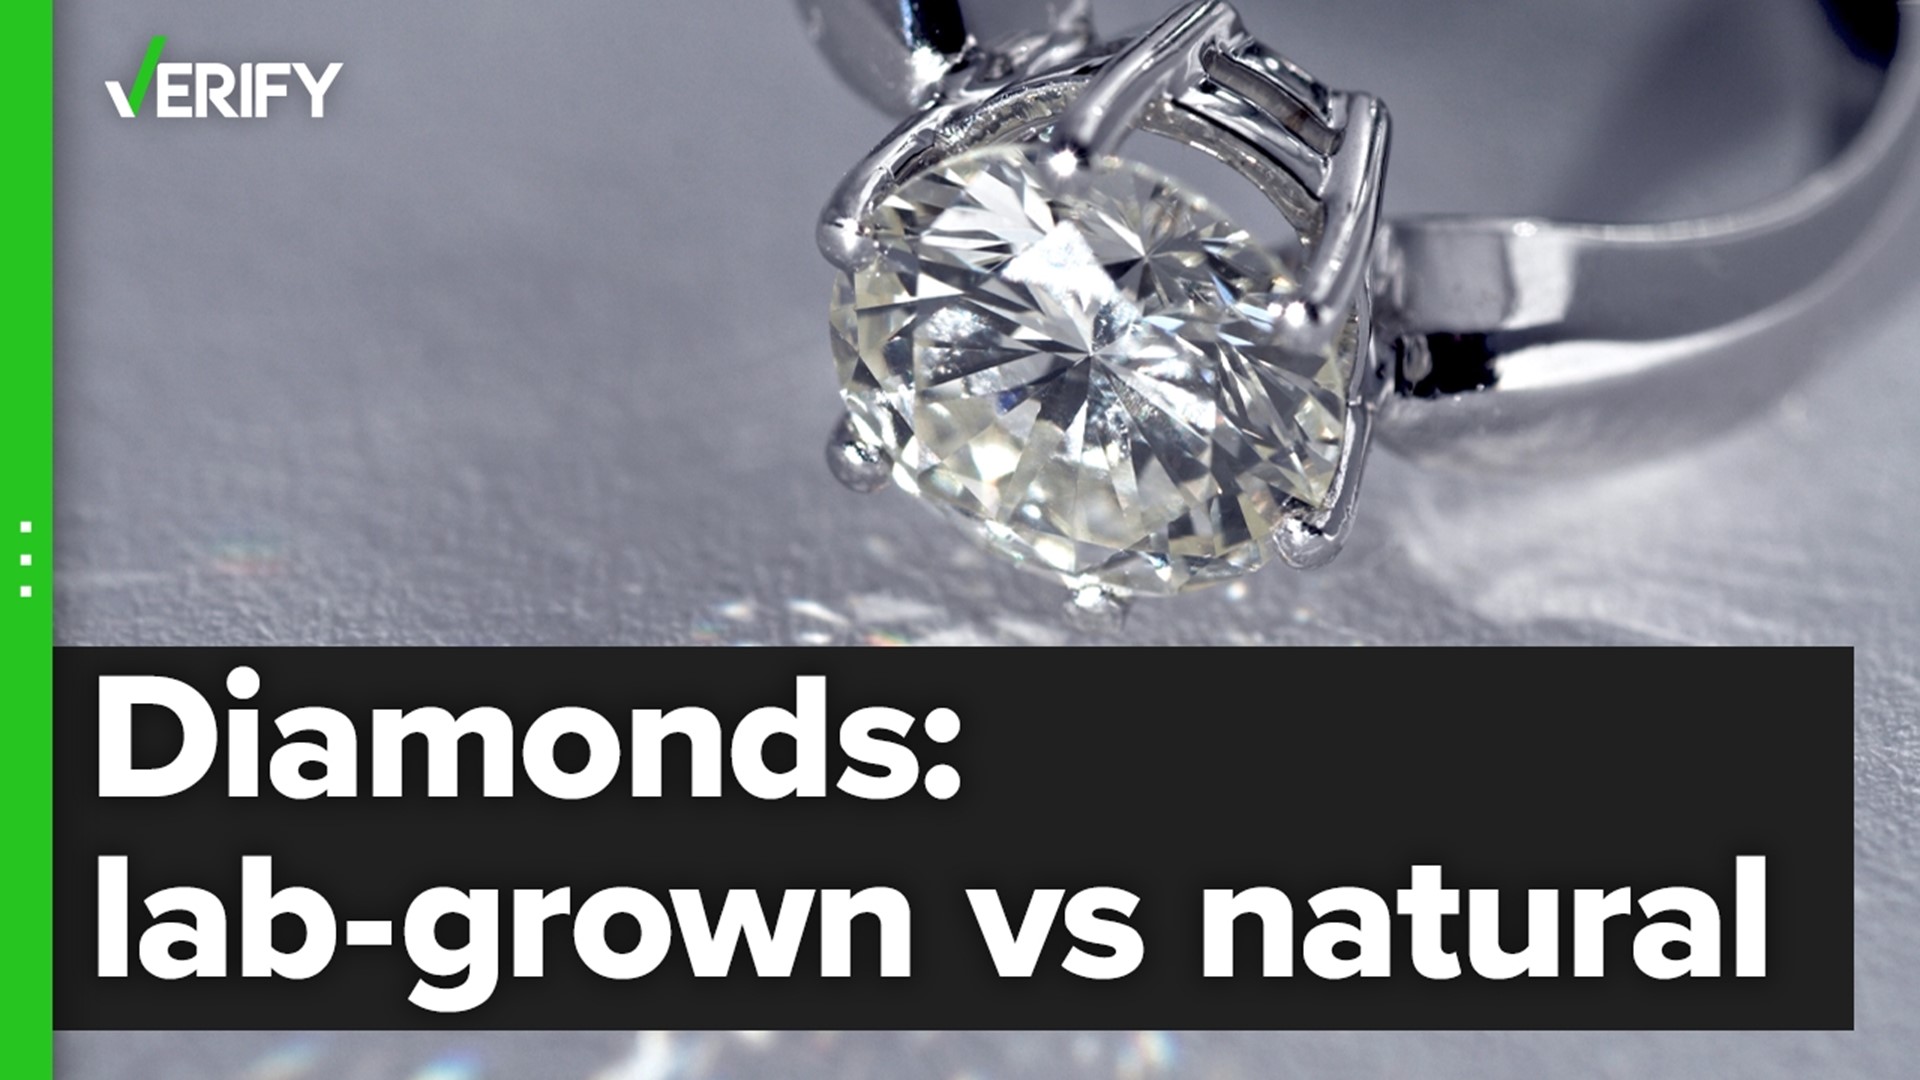 It’s nearly impossible to spot the difference between natural and lab-grown diamonds with the naked eye, but specialized equipment can detect which one is which.